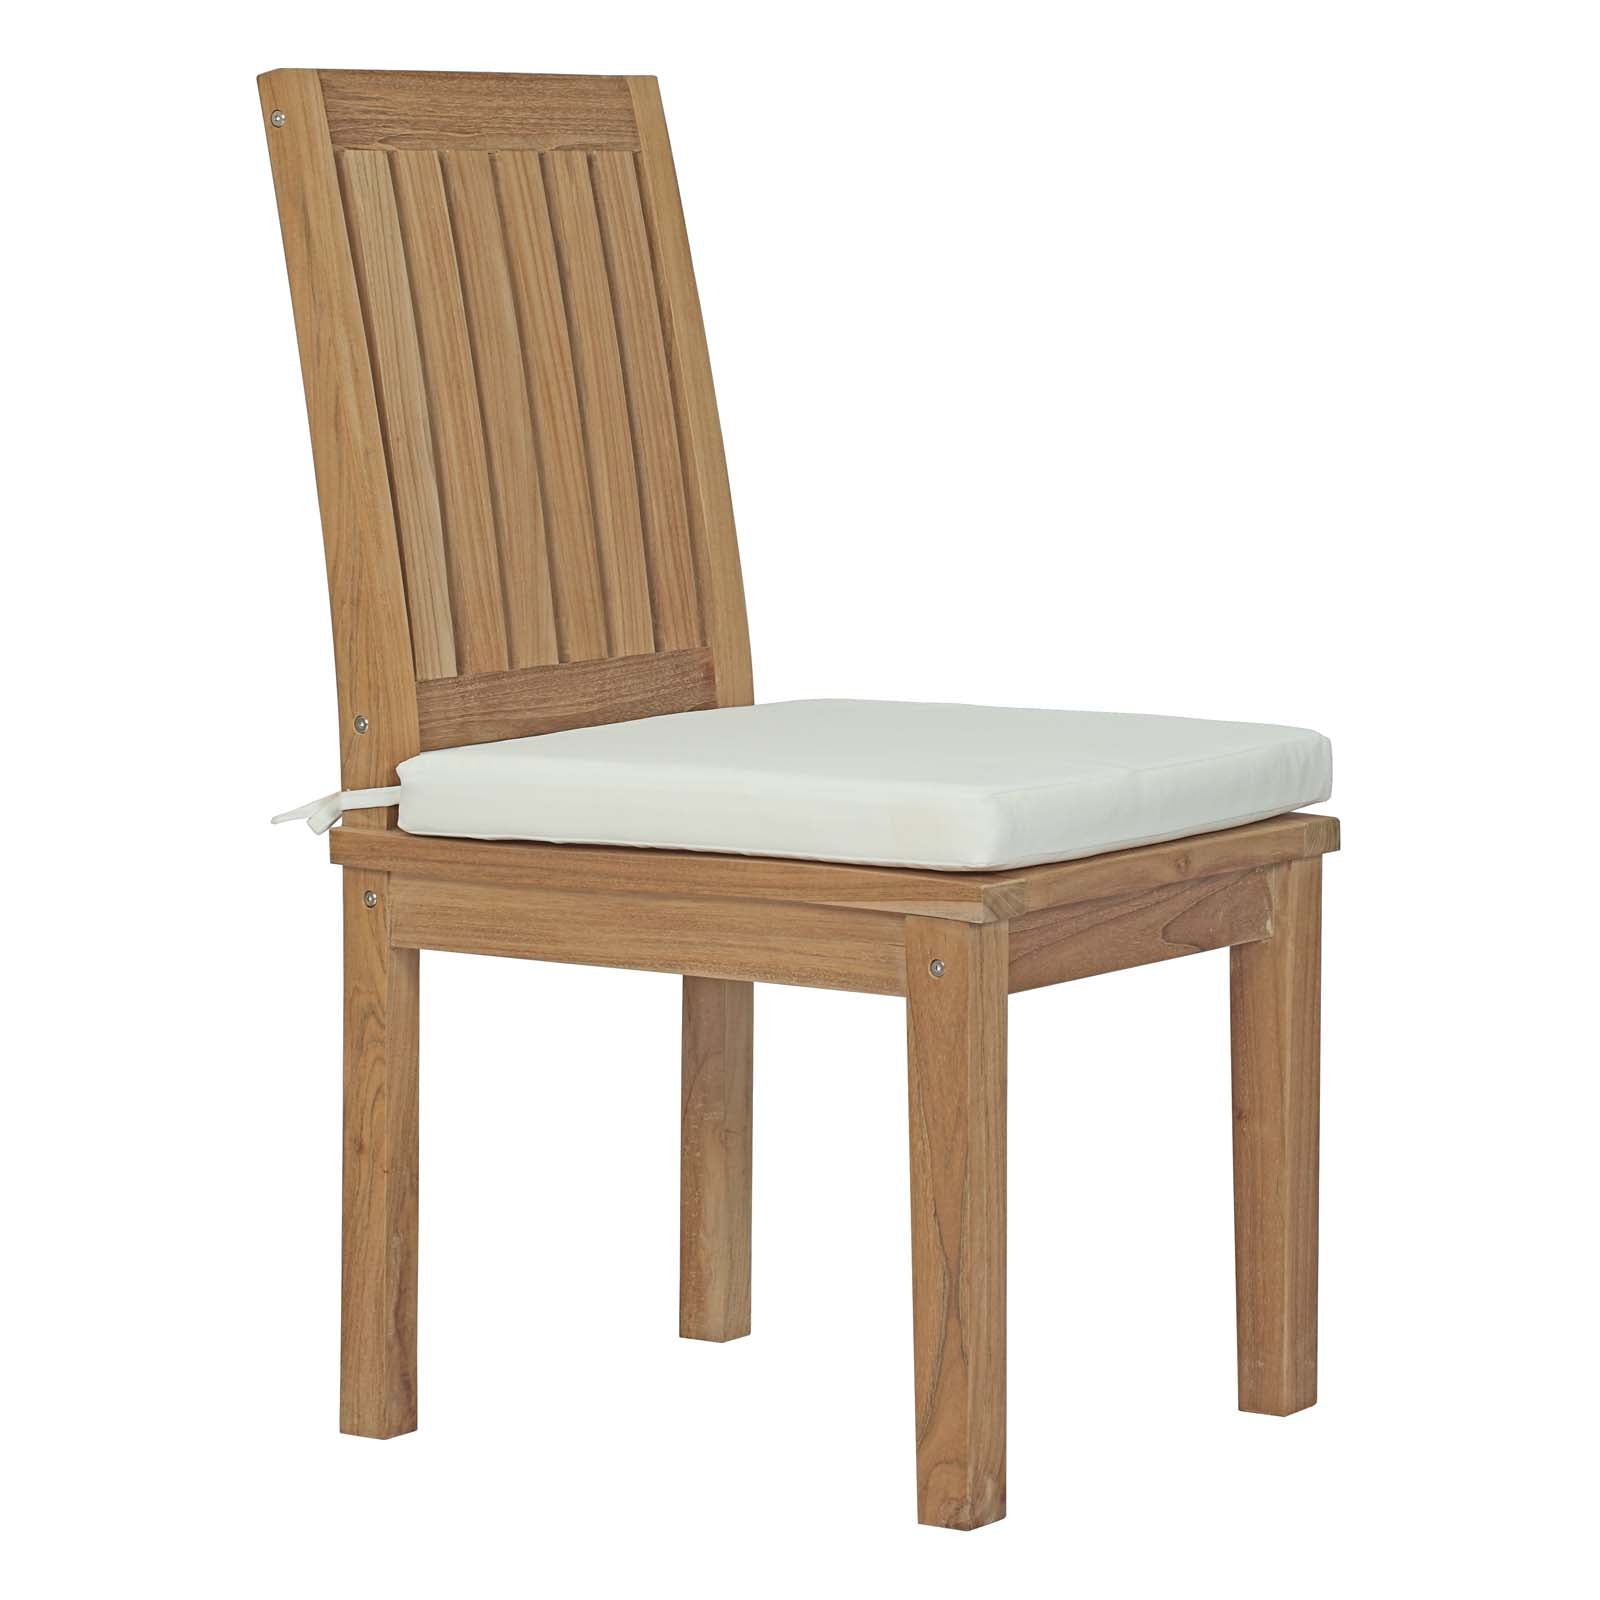 Marina Outdoor Patio Teak Dining Chair-Outdoor Dining Chair-Modway-Wall2Wall Furnishings